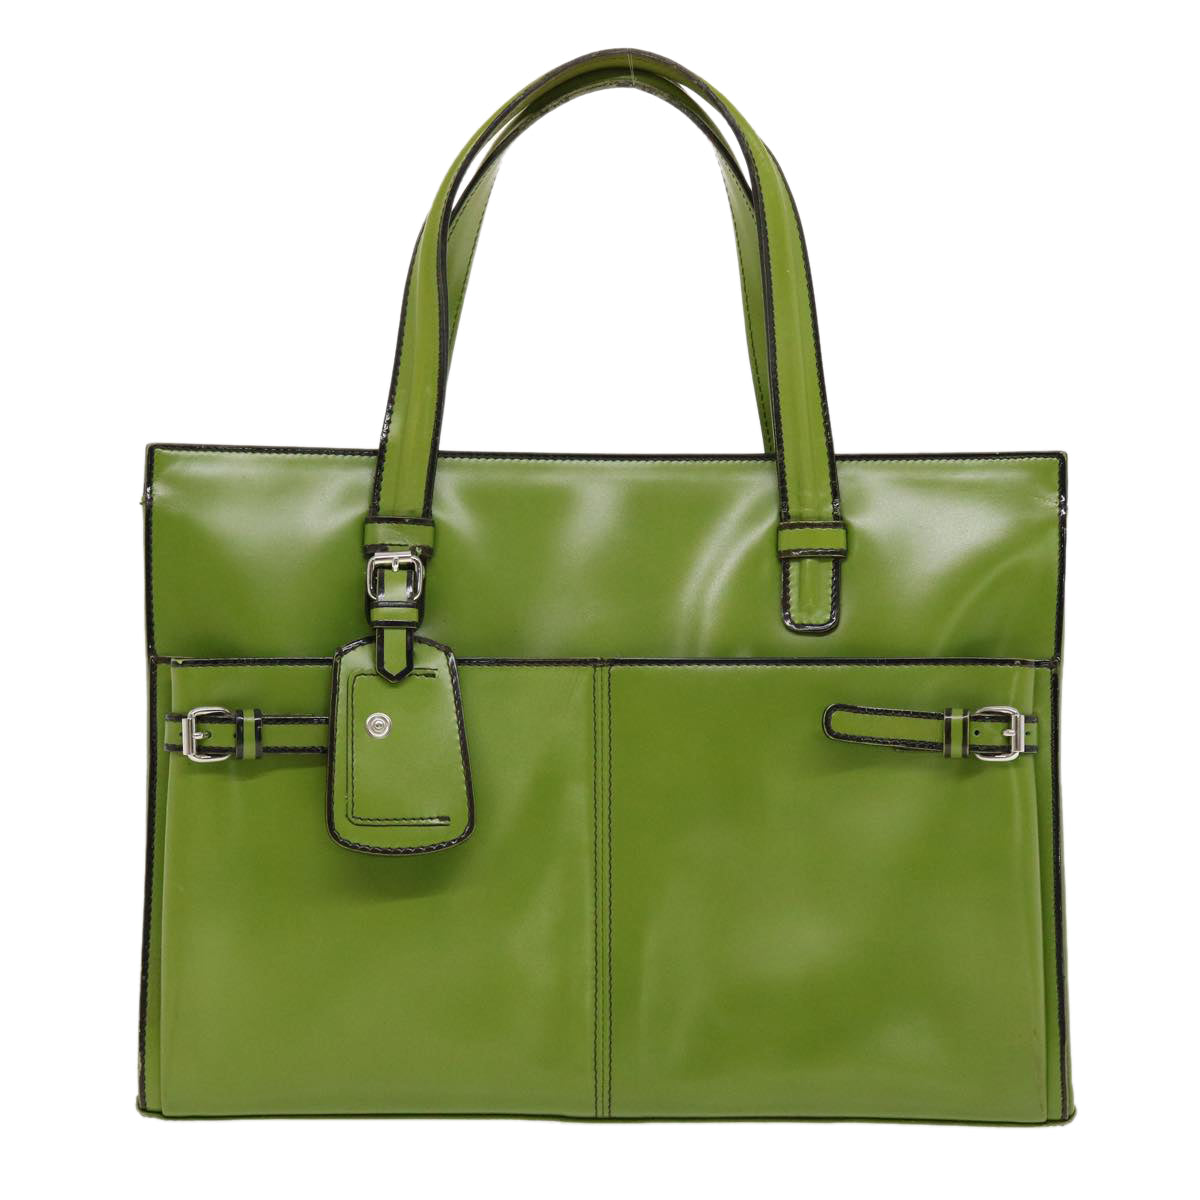 BALLY Shoulder Bag Leather 2way Green Auth cl503 - 0